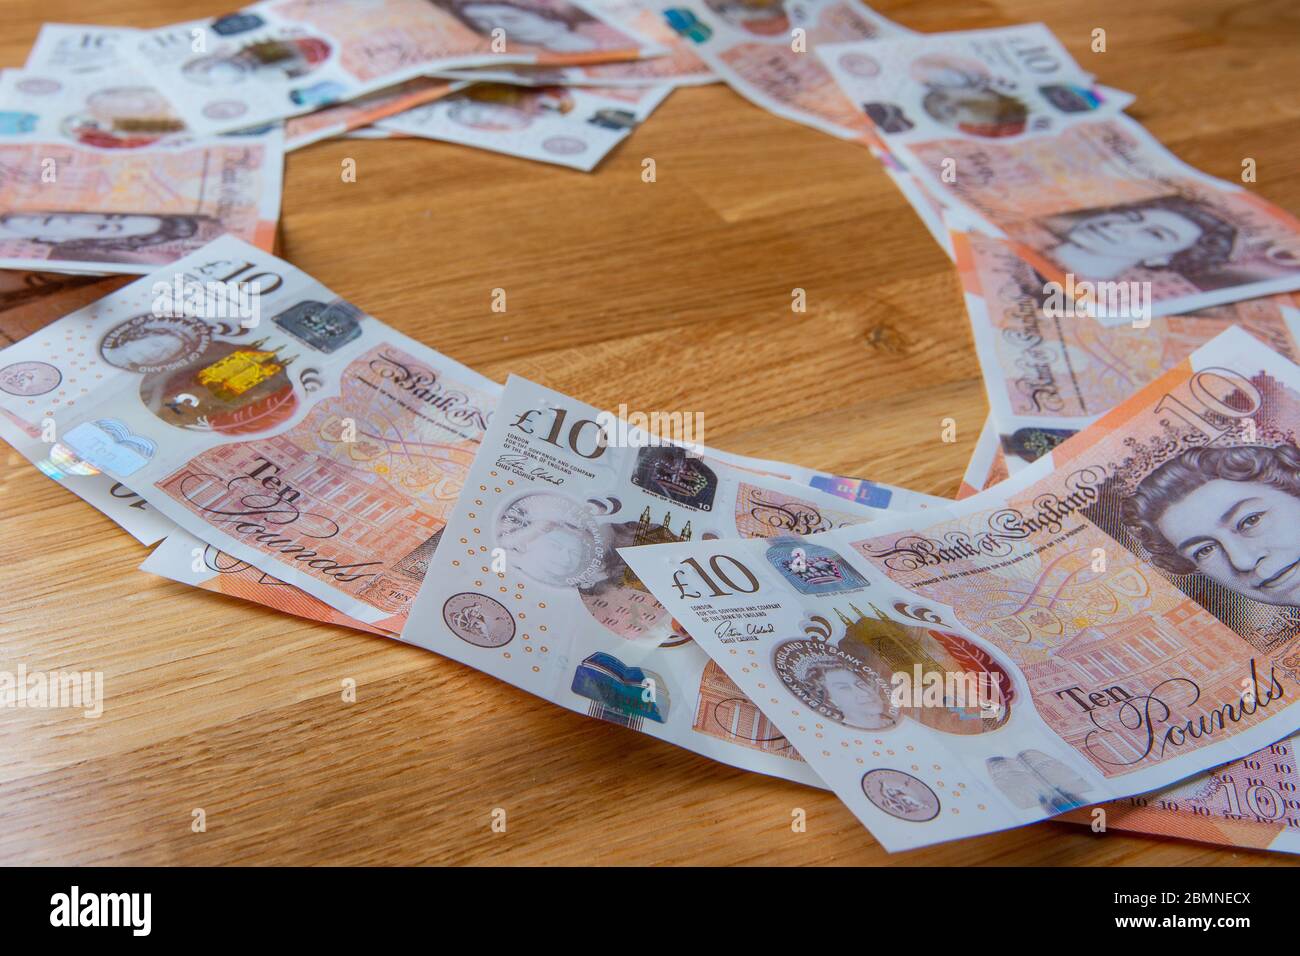 Ten pound notes in the shape of a heart, British sterling cash Stock Photo